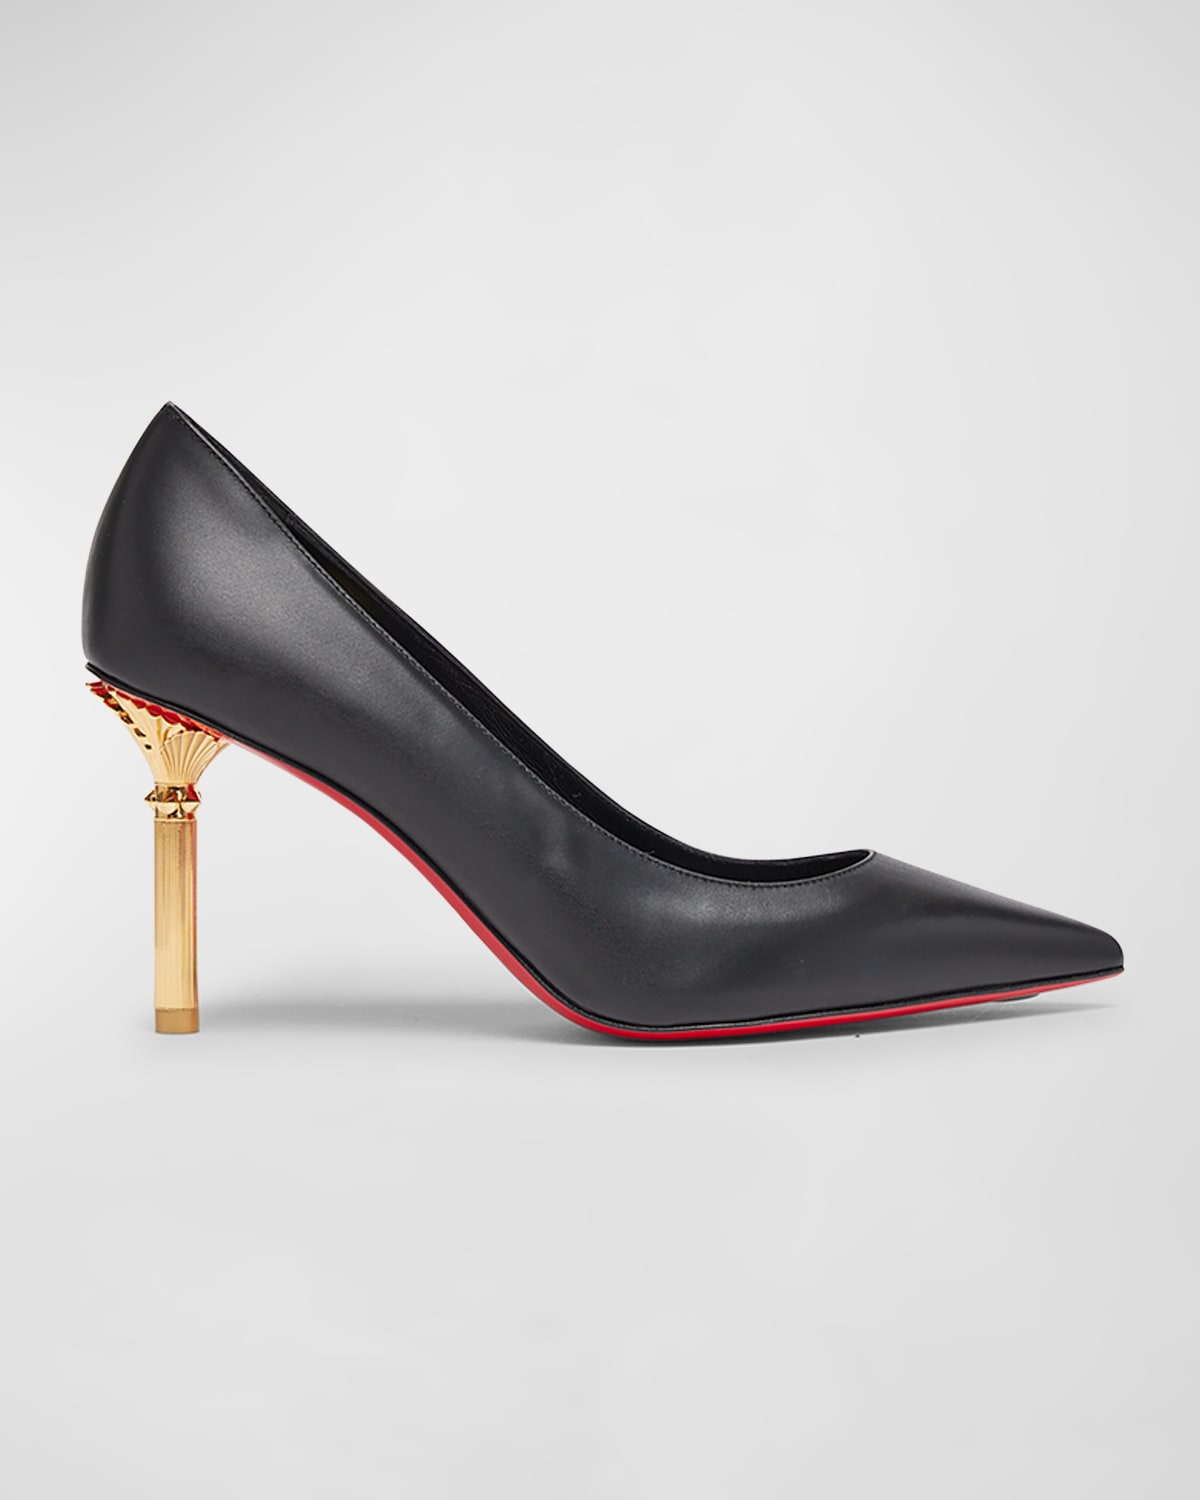 Christian Louboutin Sleek Leather Red Sole Pumps In Black/gold